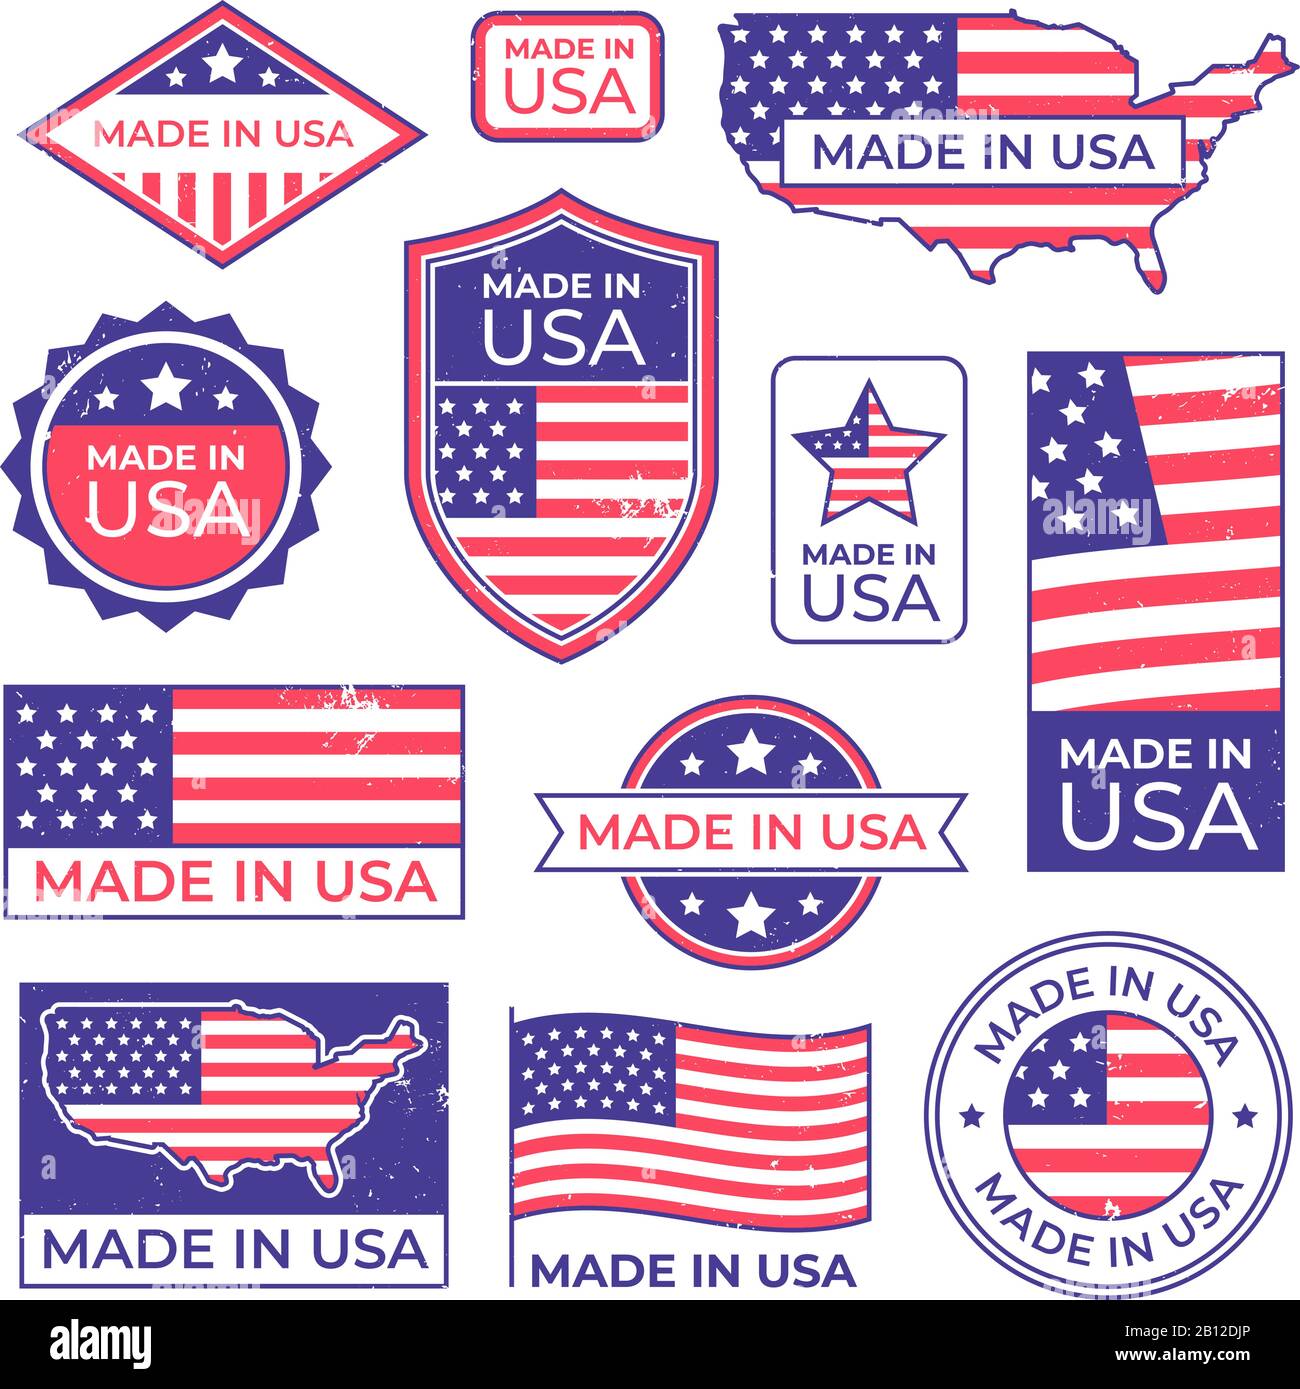 Made in usa logo. American proud patriot tag, manufacturing for usa label stamp and united states of america patriotic flag vector set Stock Vector